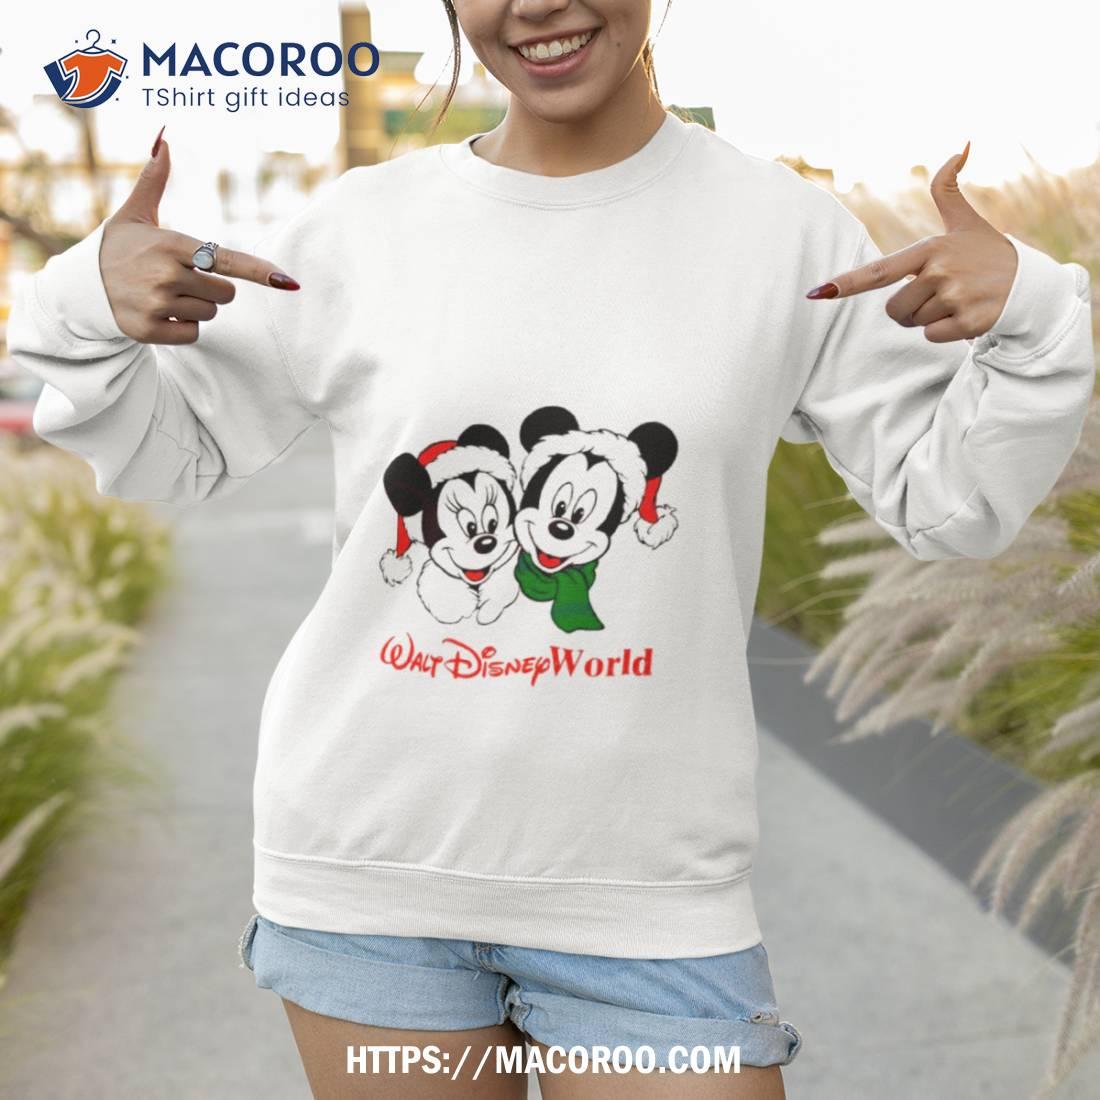 Disney Mickey Mouse Classic Pose - Short Sleeve Cotton T-Shirt for Adults-  Customized-Athletic Heather